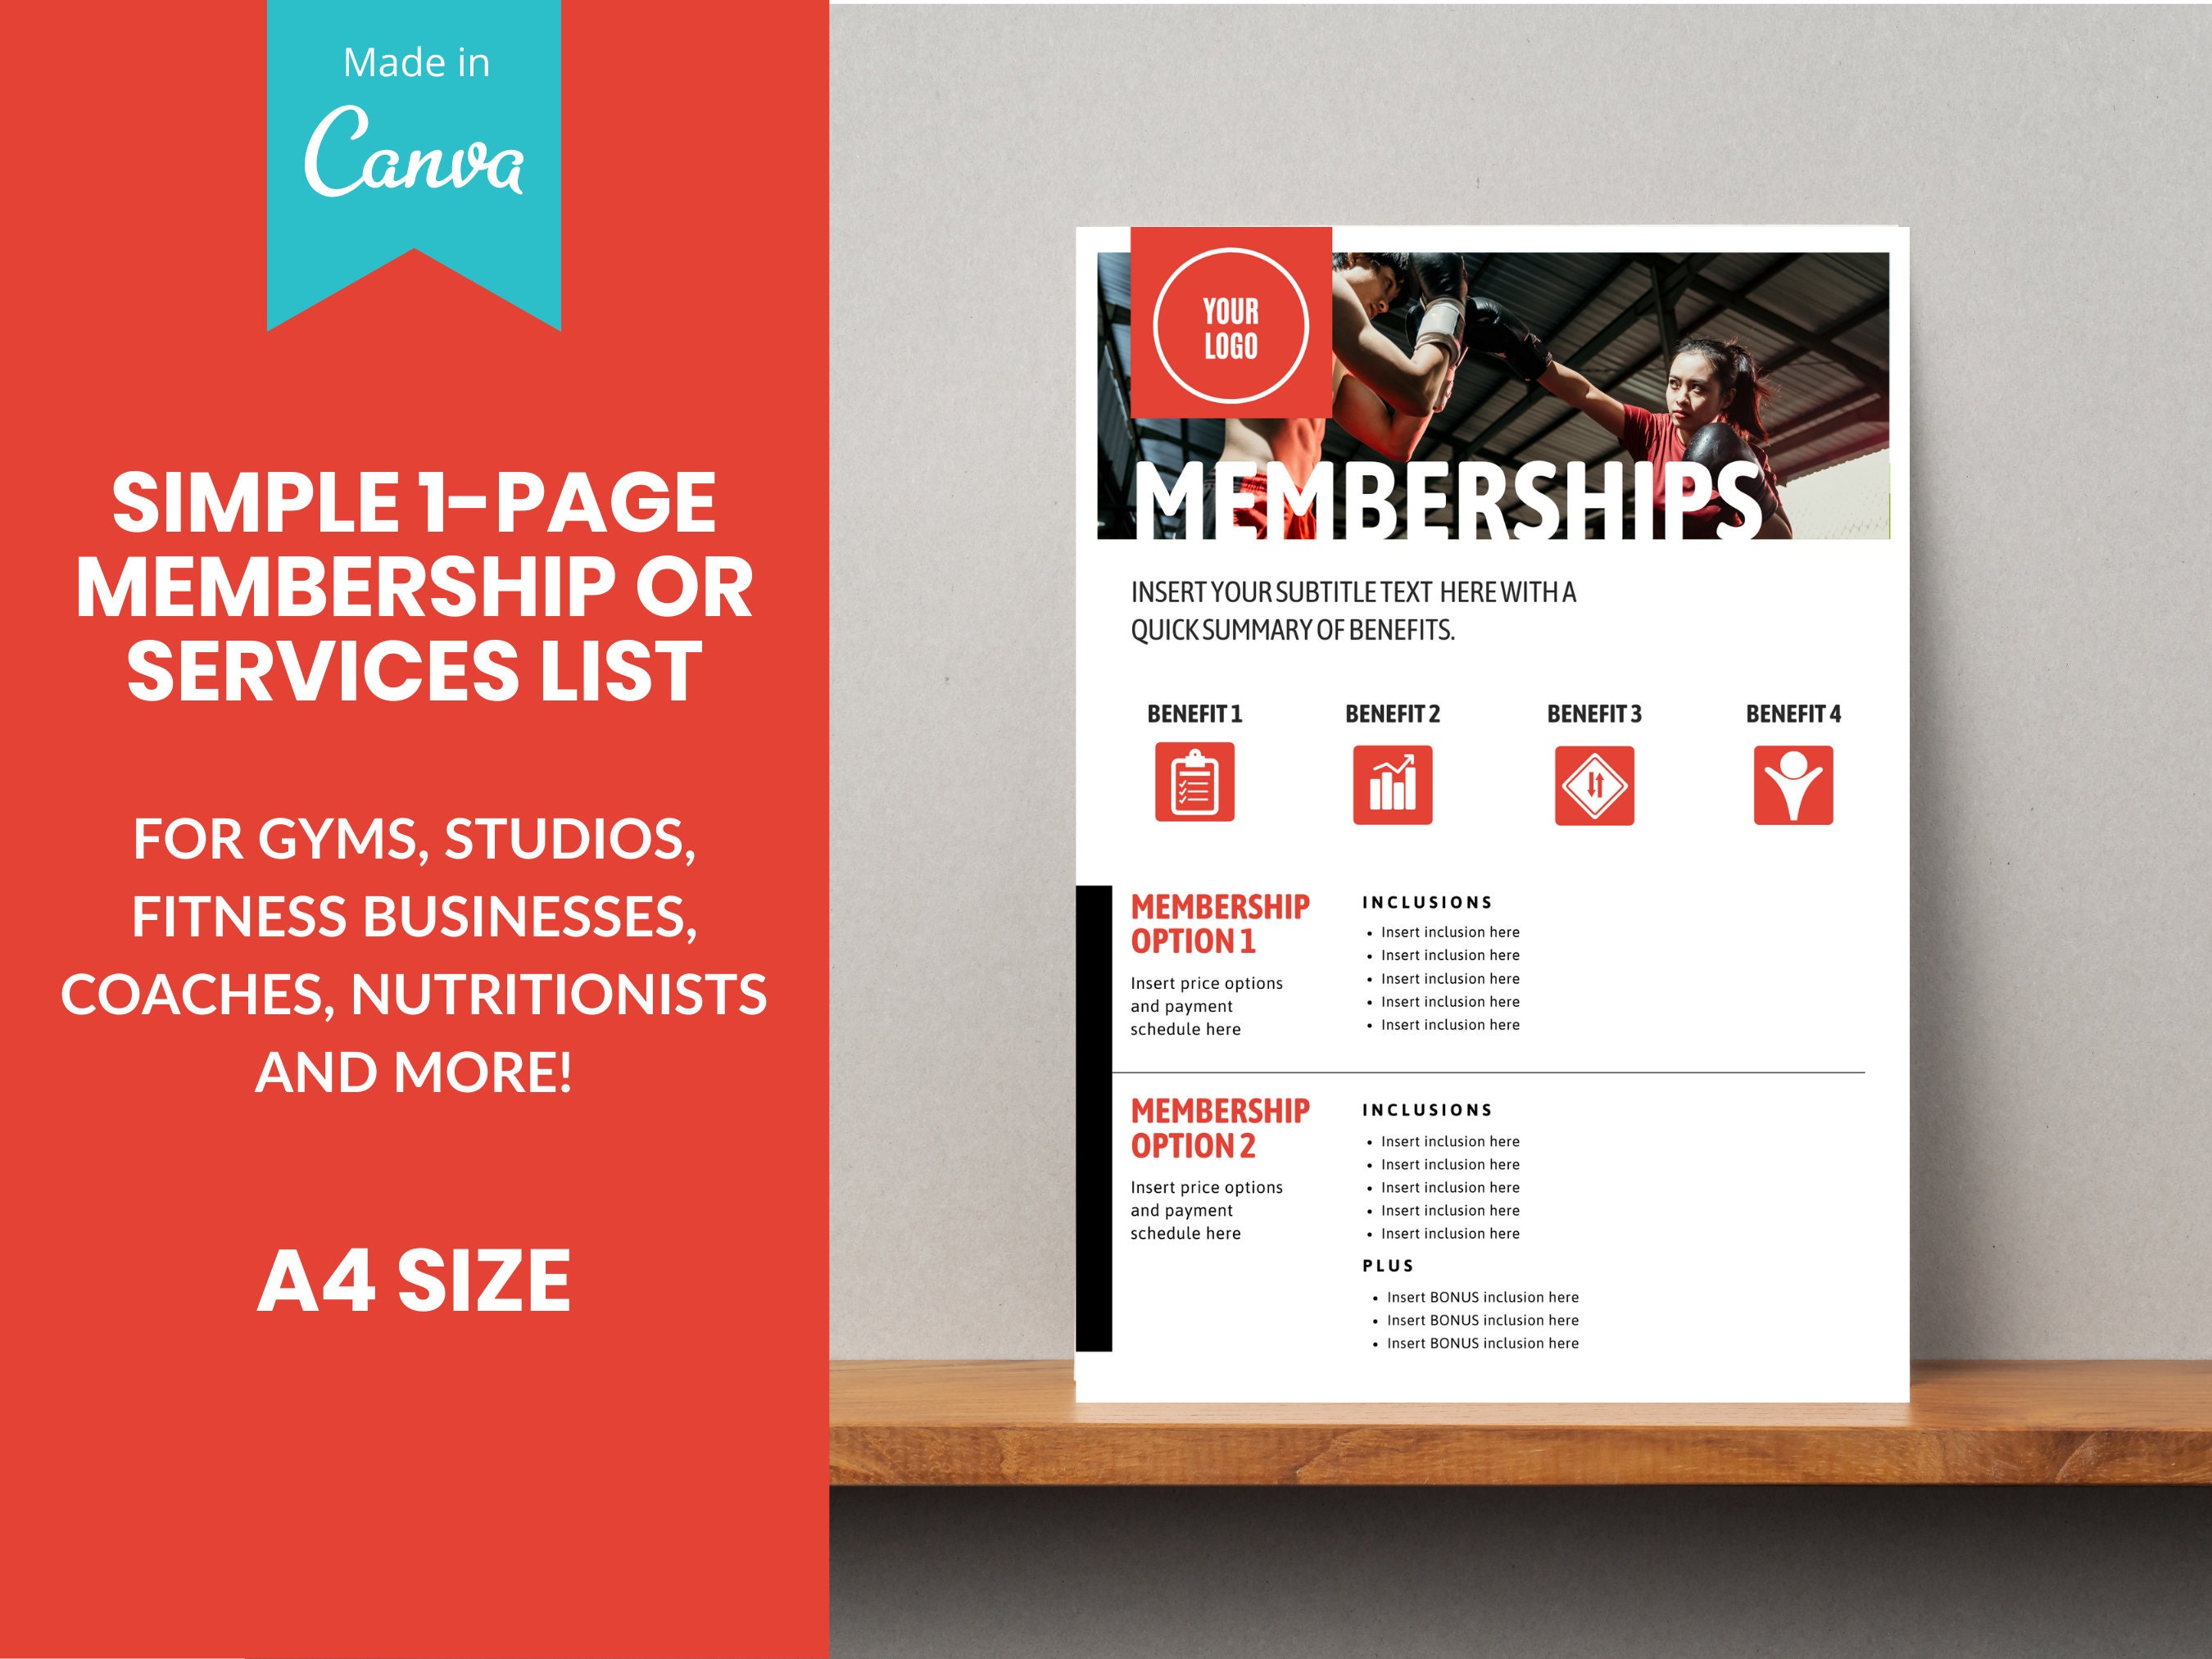 Simple Membership Price List, Services List Canva Templates for